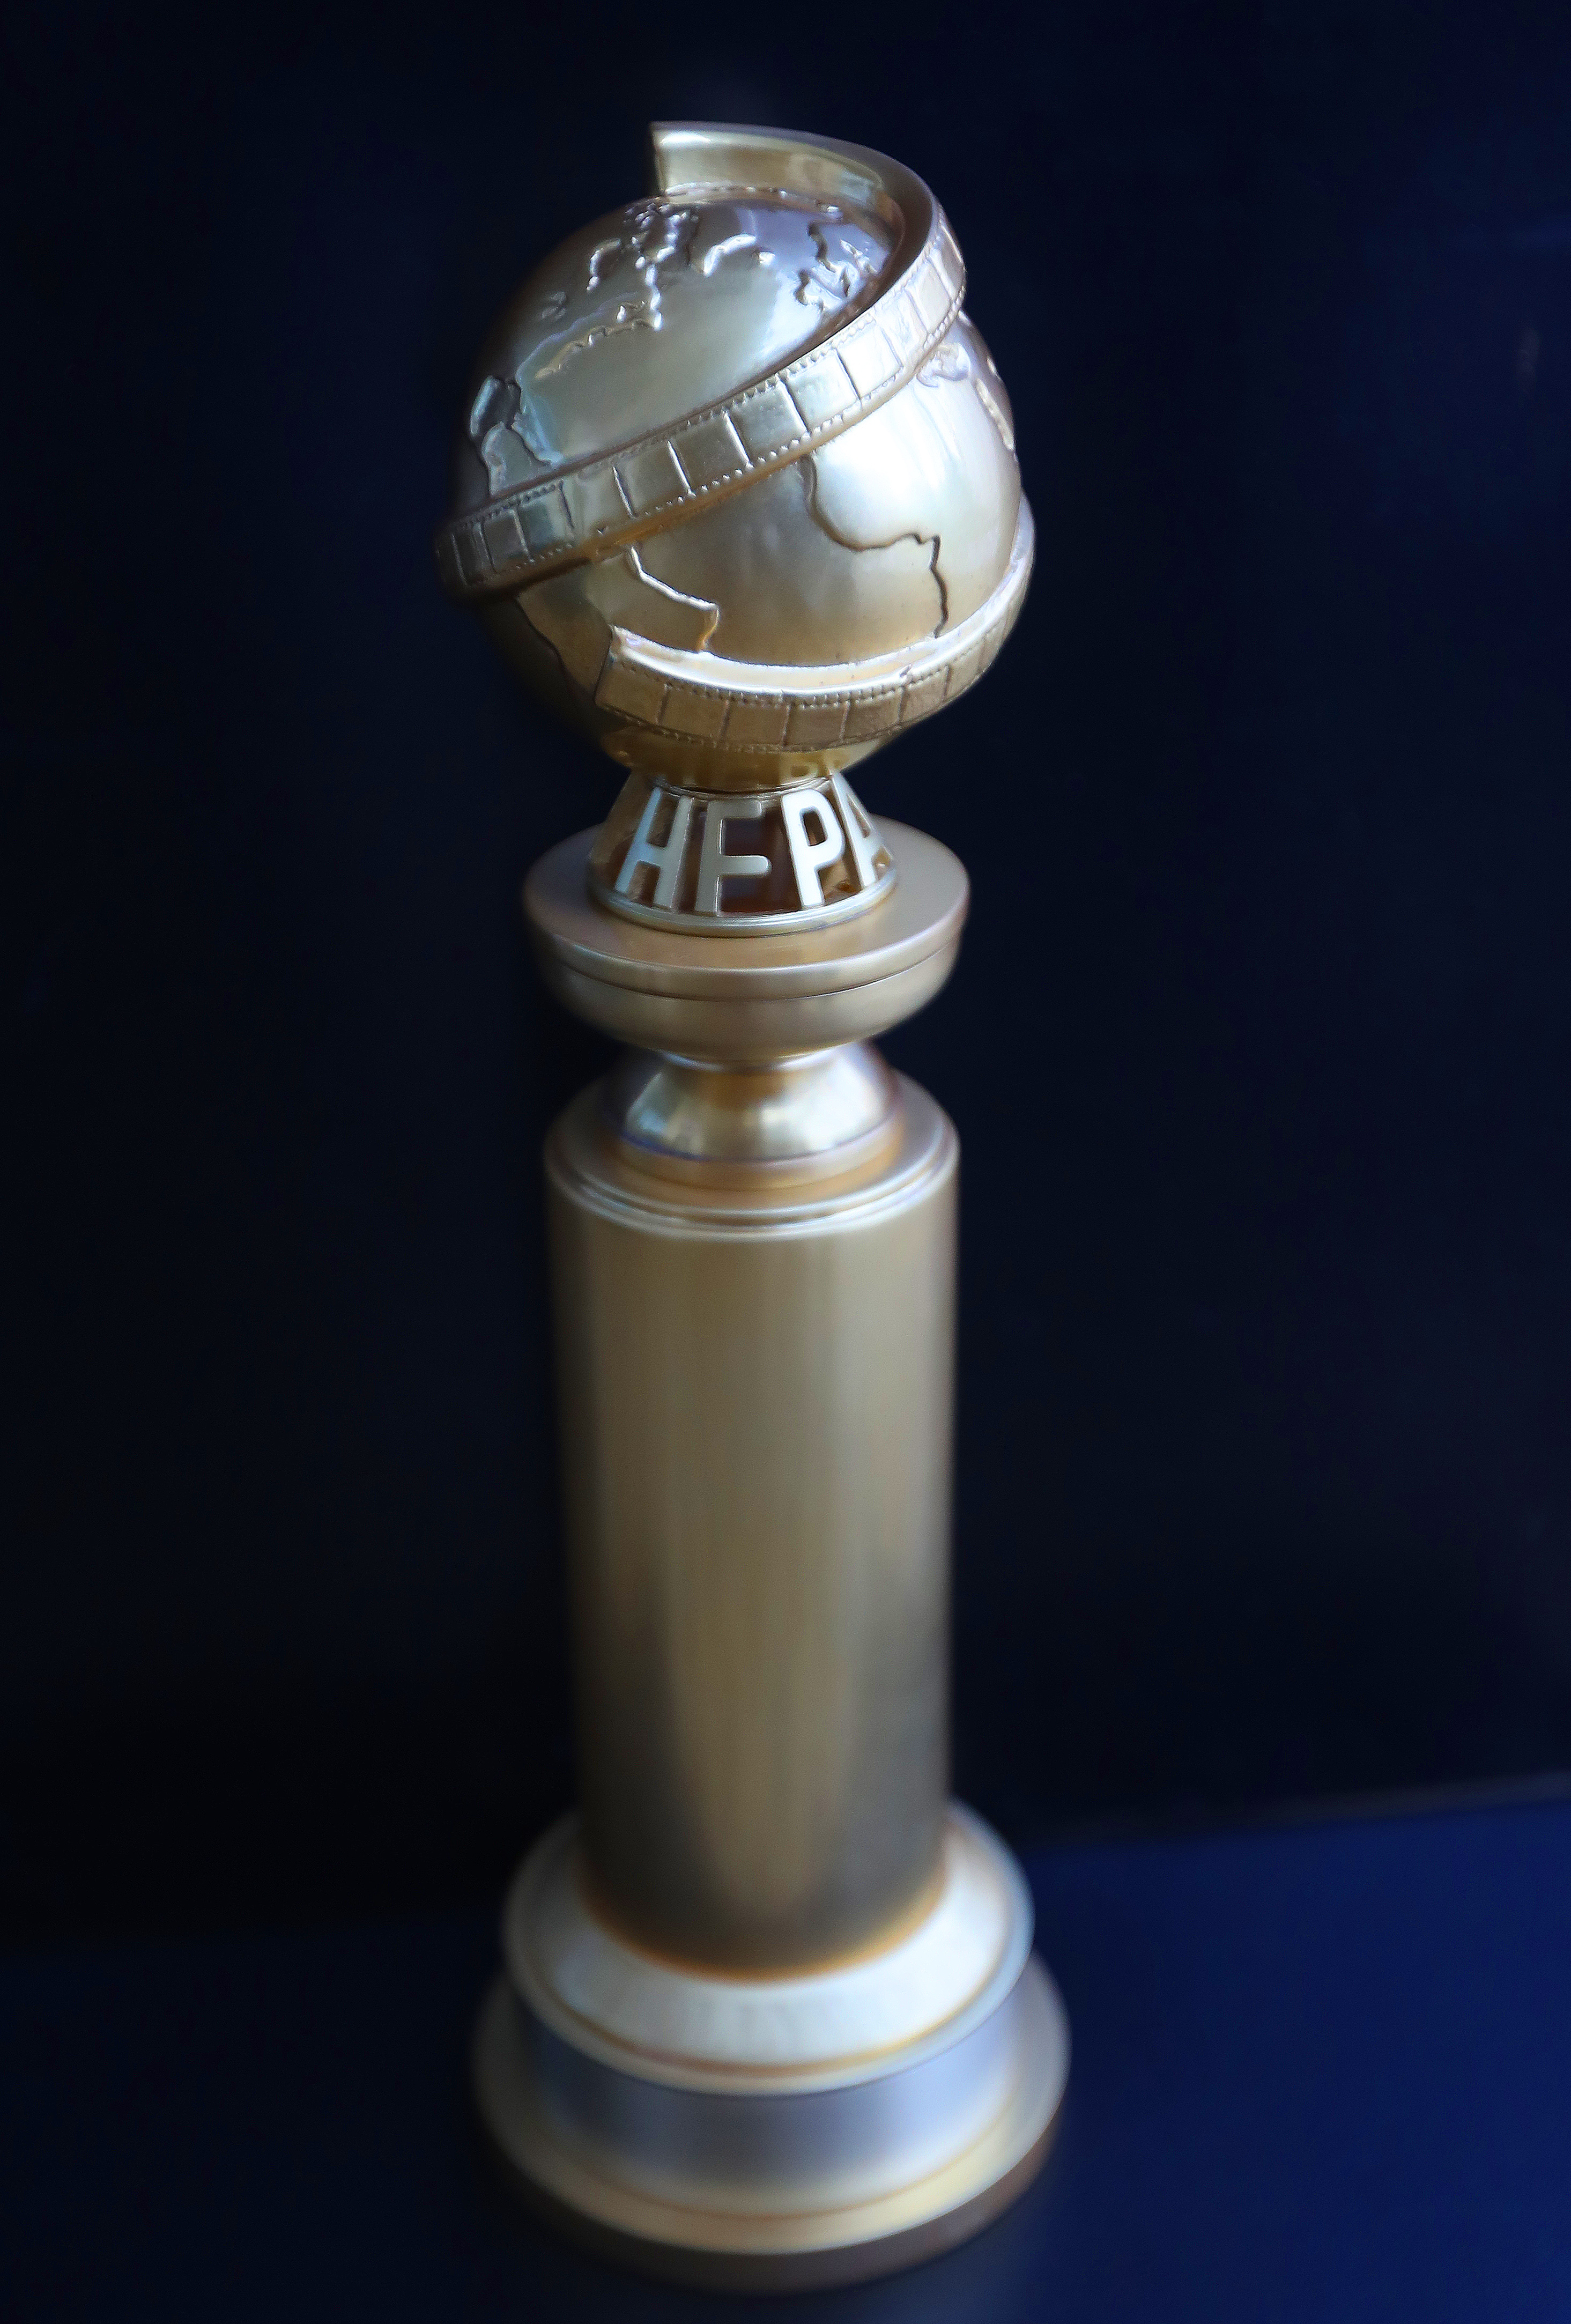 How R/GA Redesigned the Golden Globe Trophy Inside and Out